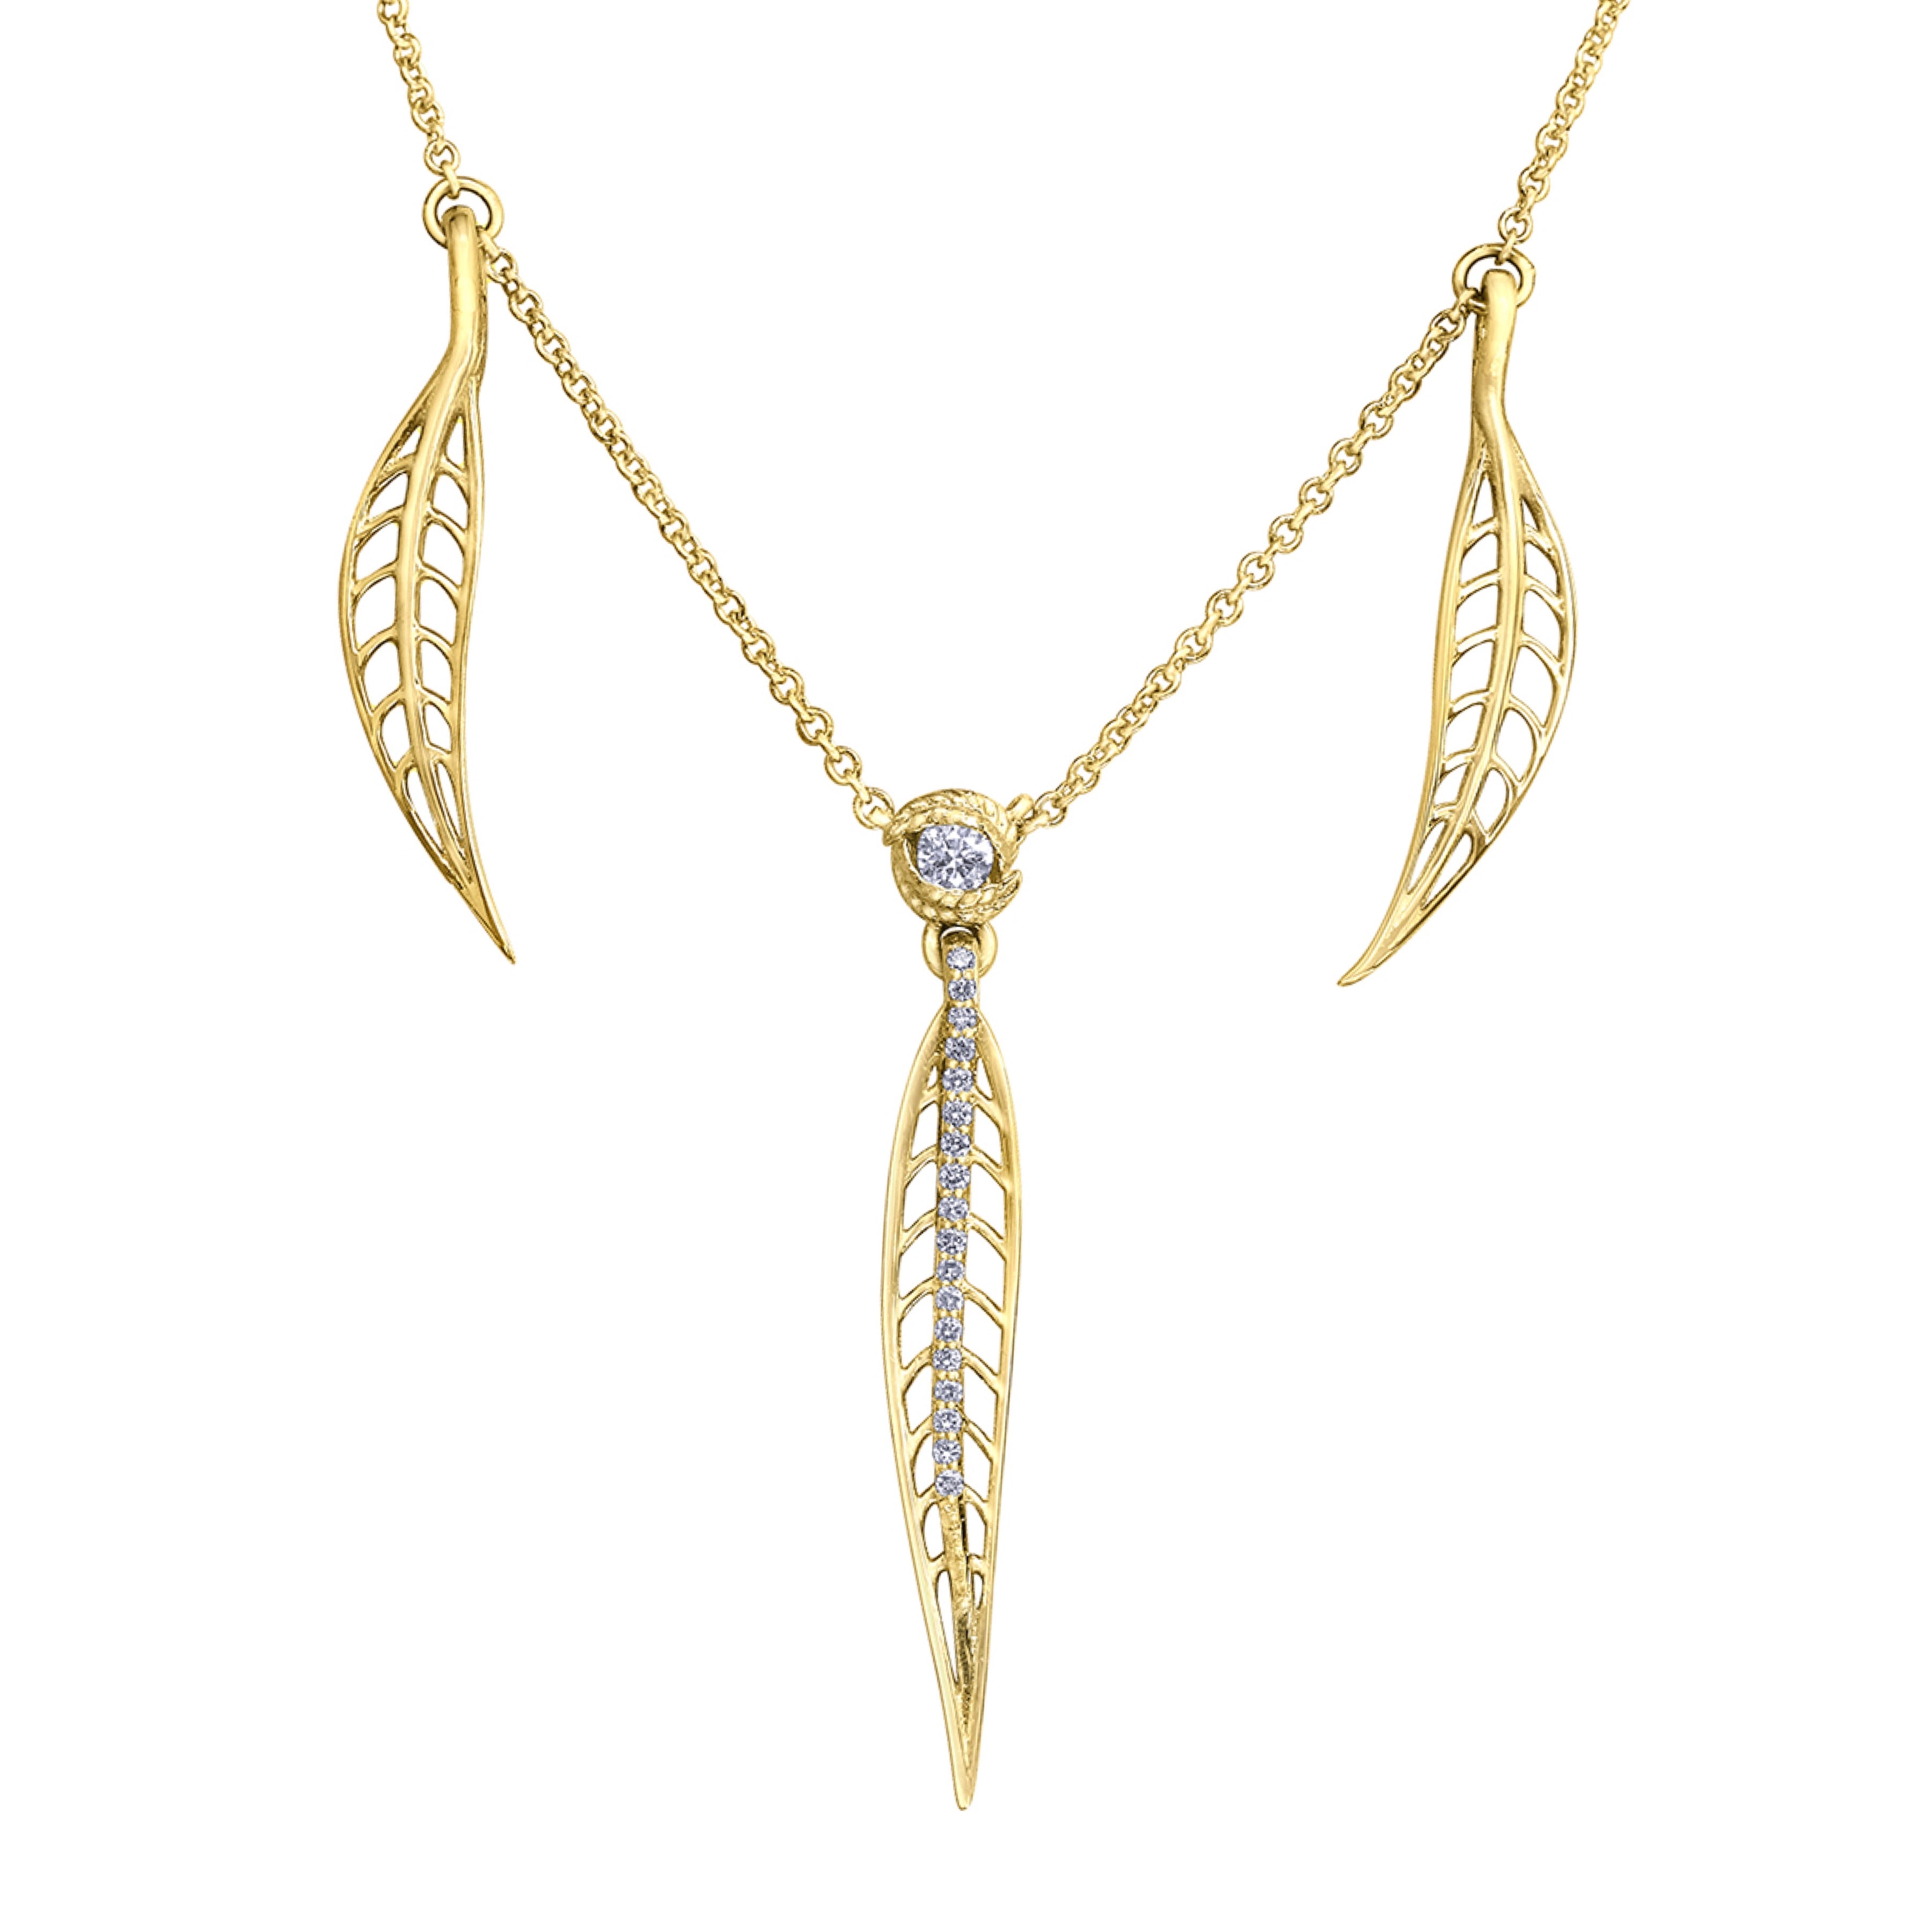 Crafted in 14KT yellow Canadian Certified Gold, this necklace features a round brilliant-cut Canadian diamond and three diamond-set willow tree leaves.